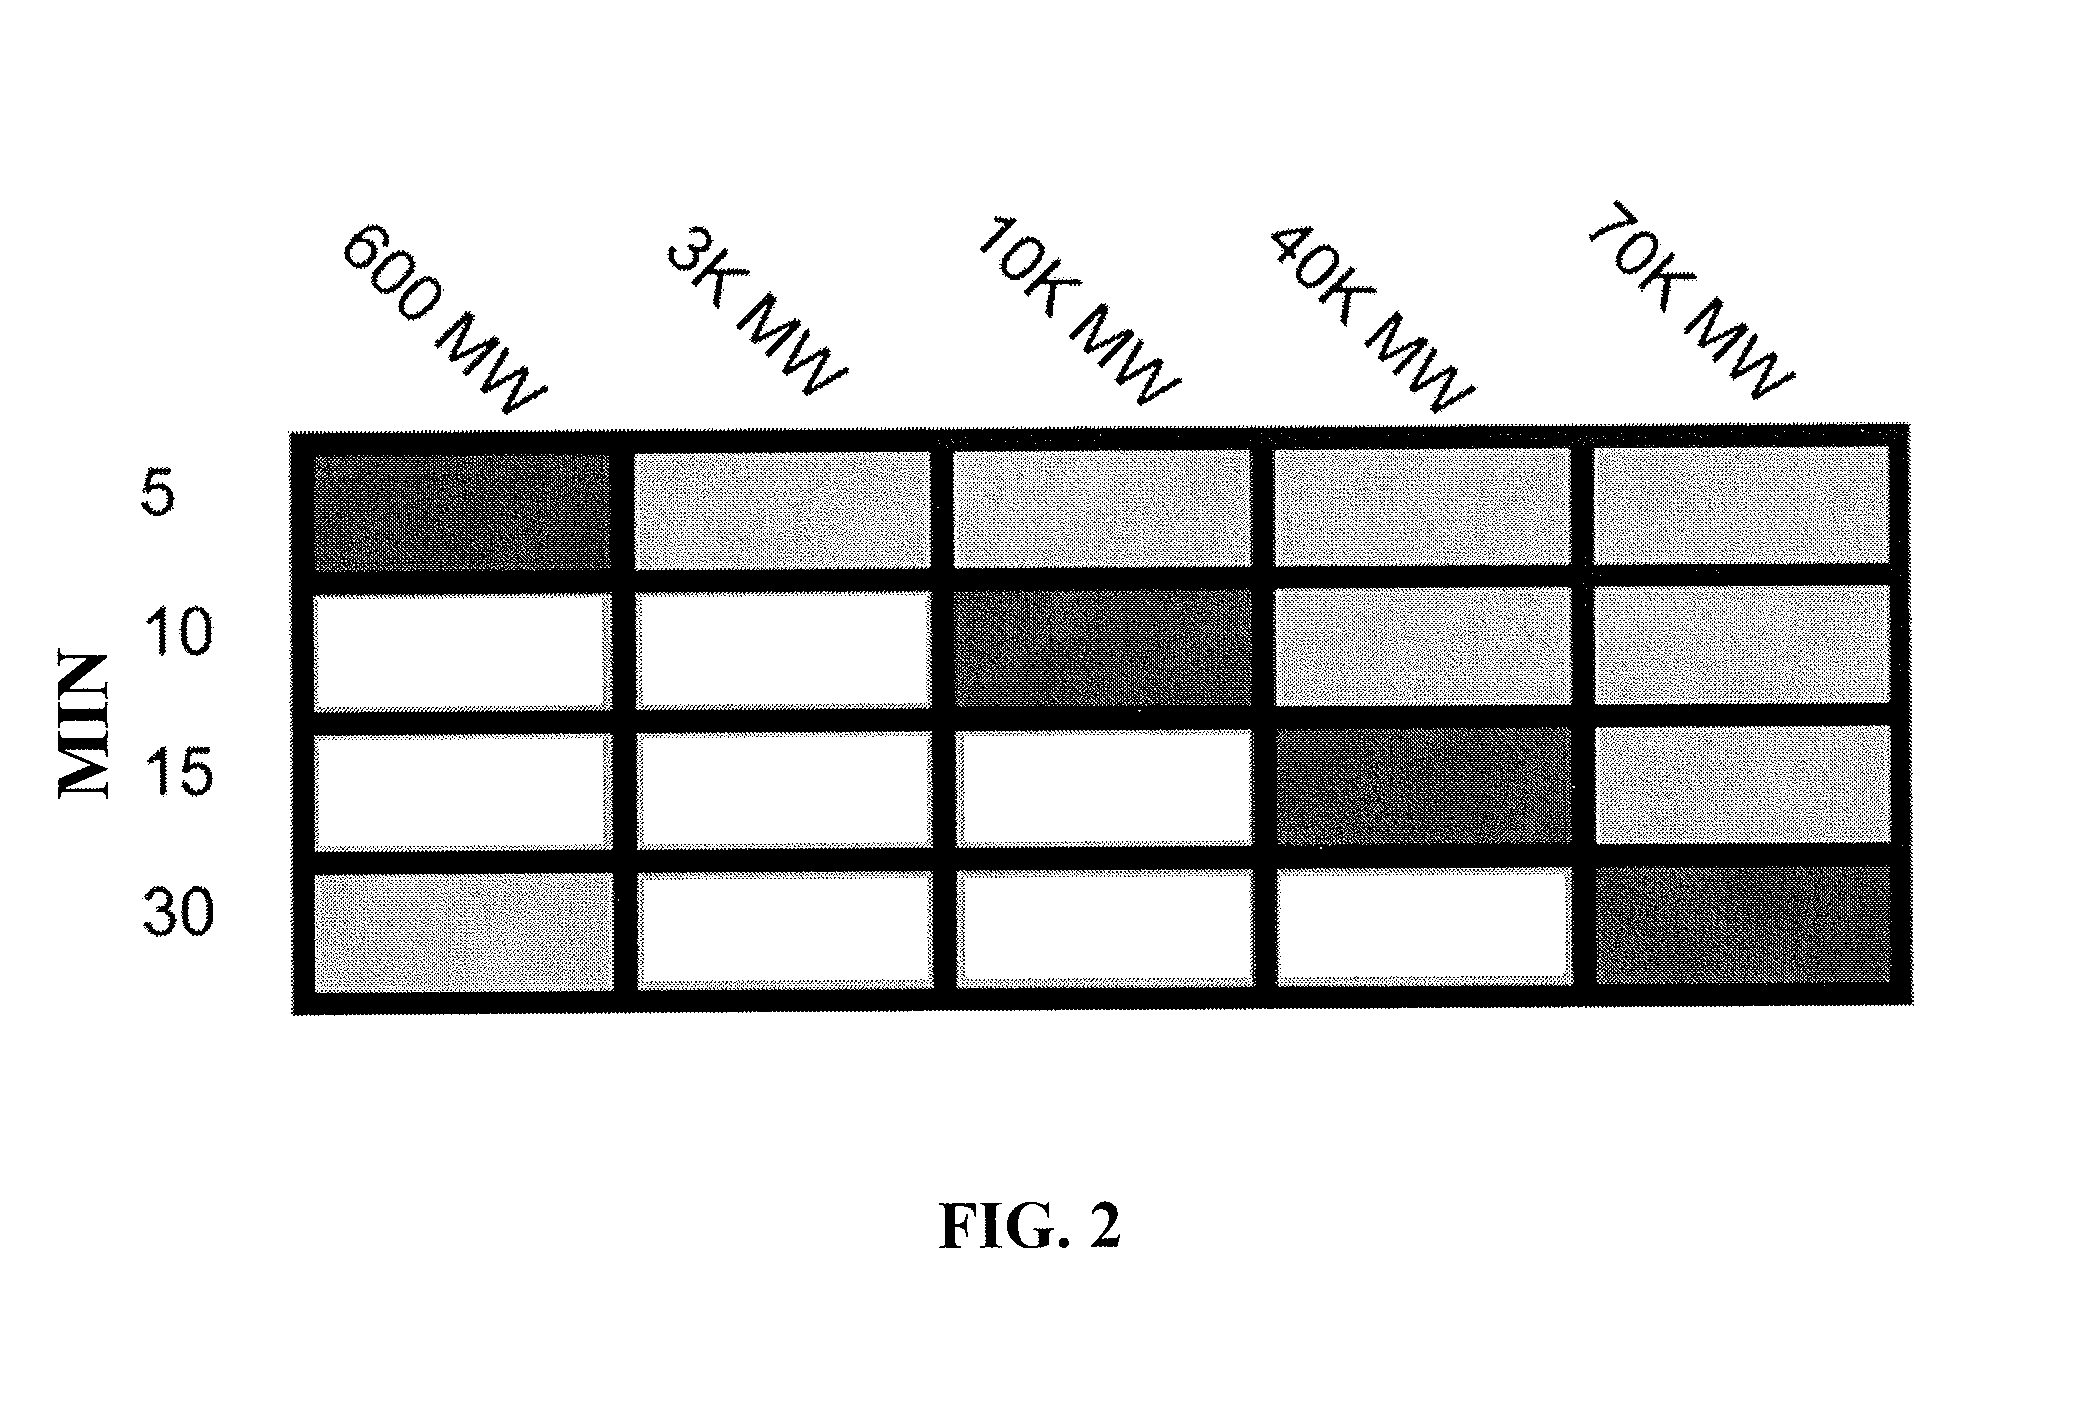 Methods of treating and preventing diseases and disorders of the central nervous system